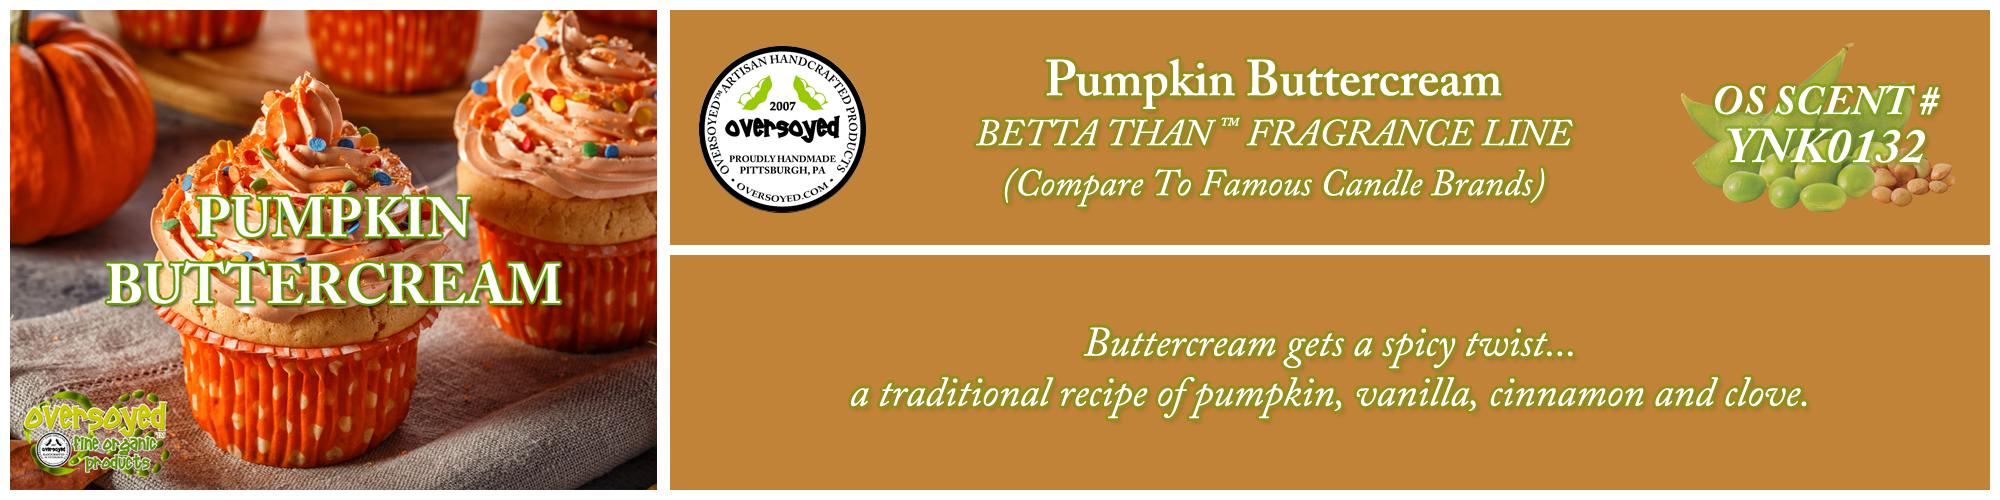 Pumpkin Buttercream Handcrafted Products Collection